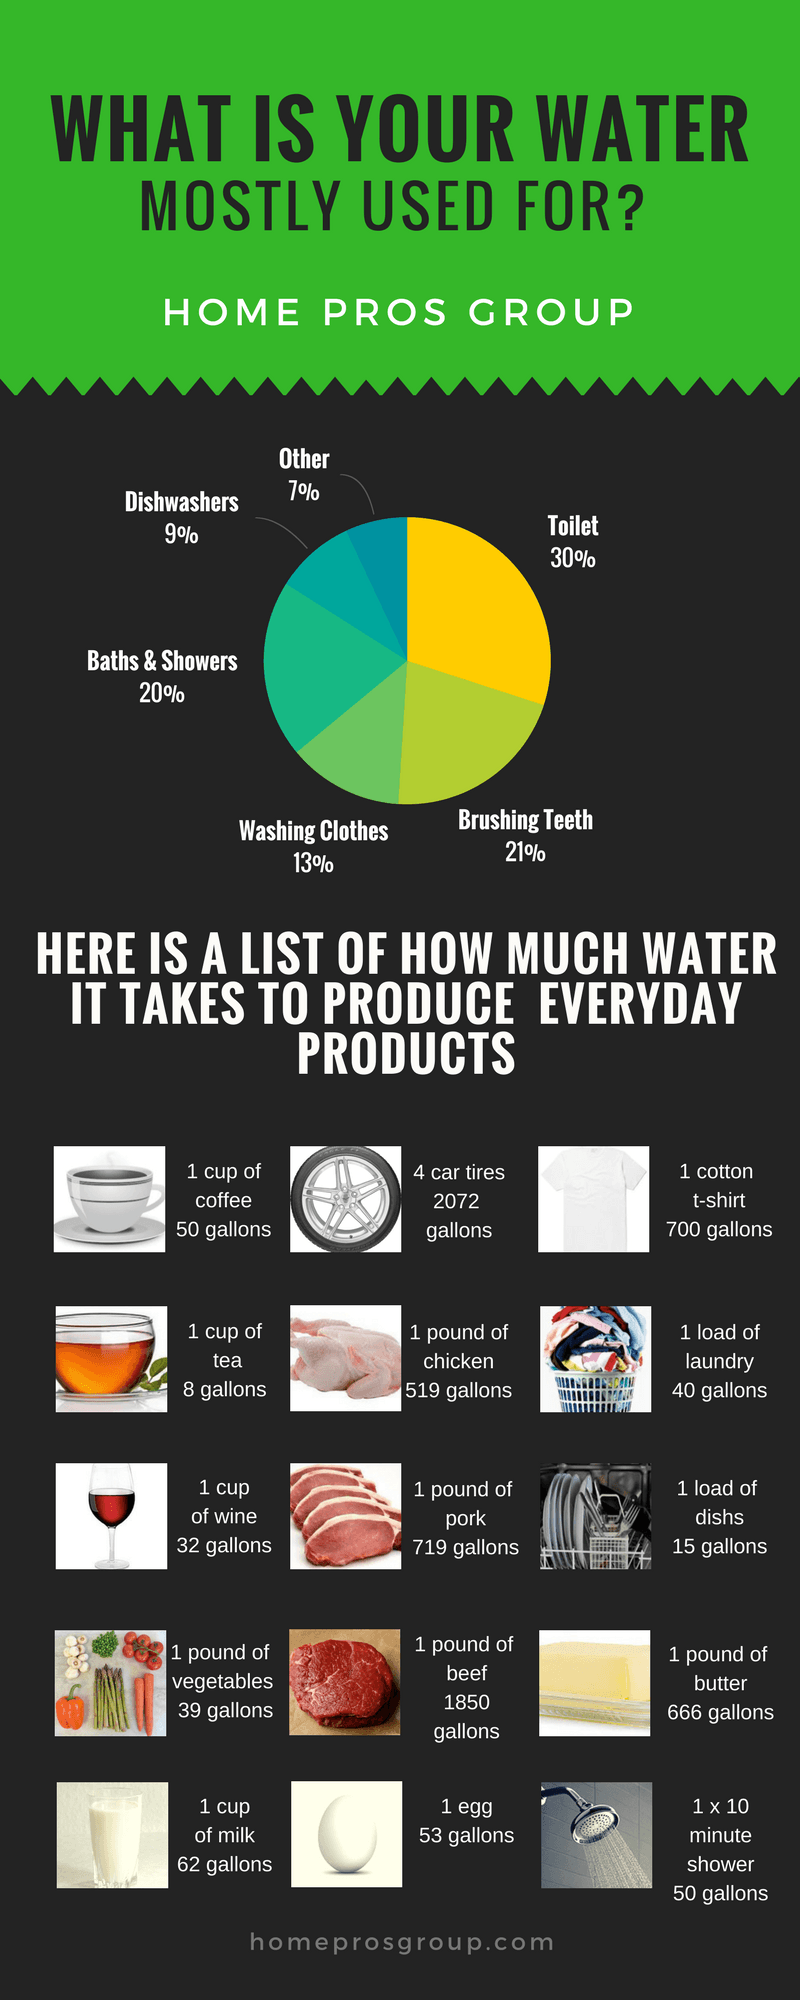 Where Does Your Water Go? 